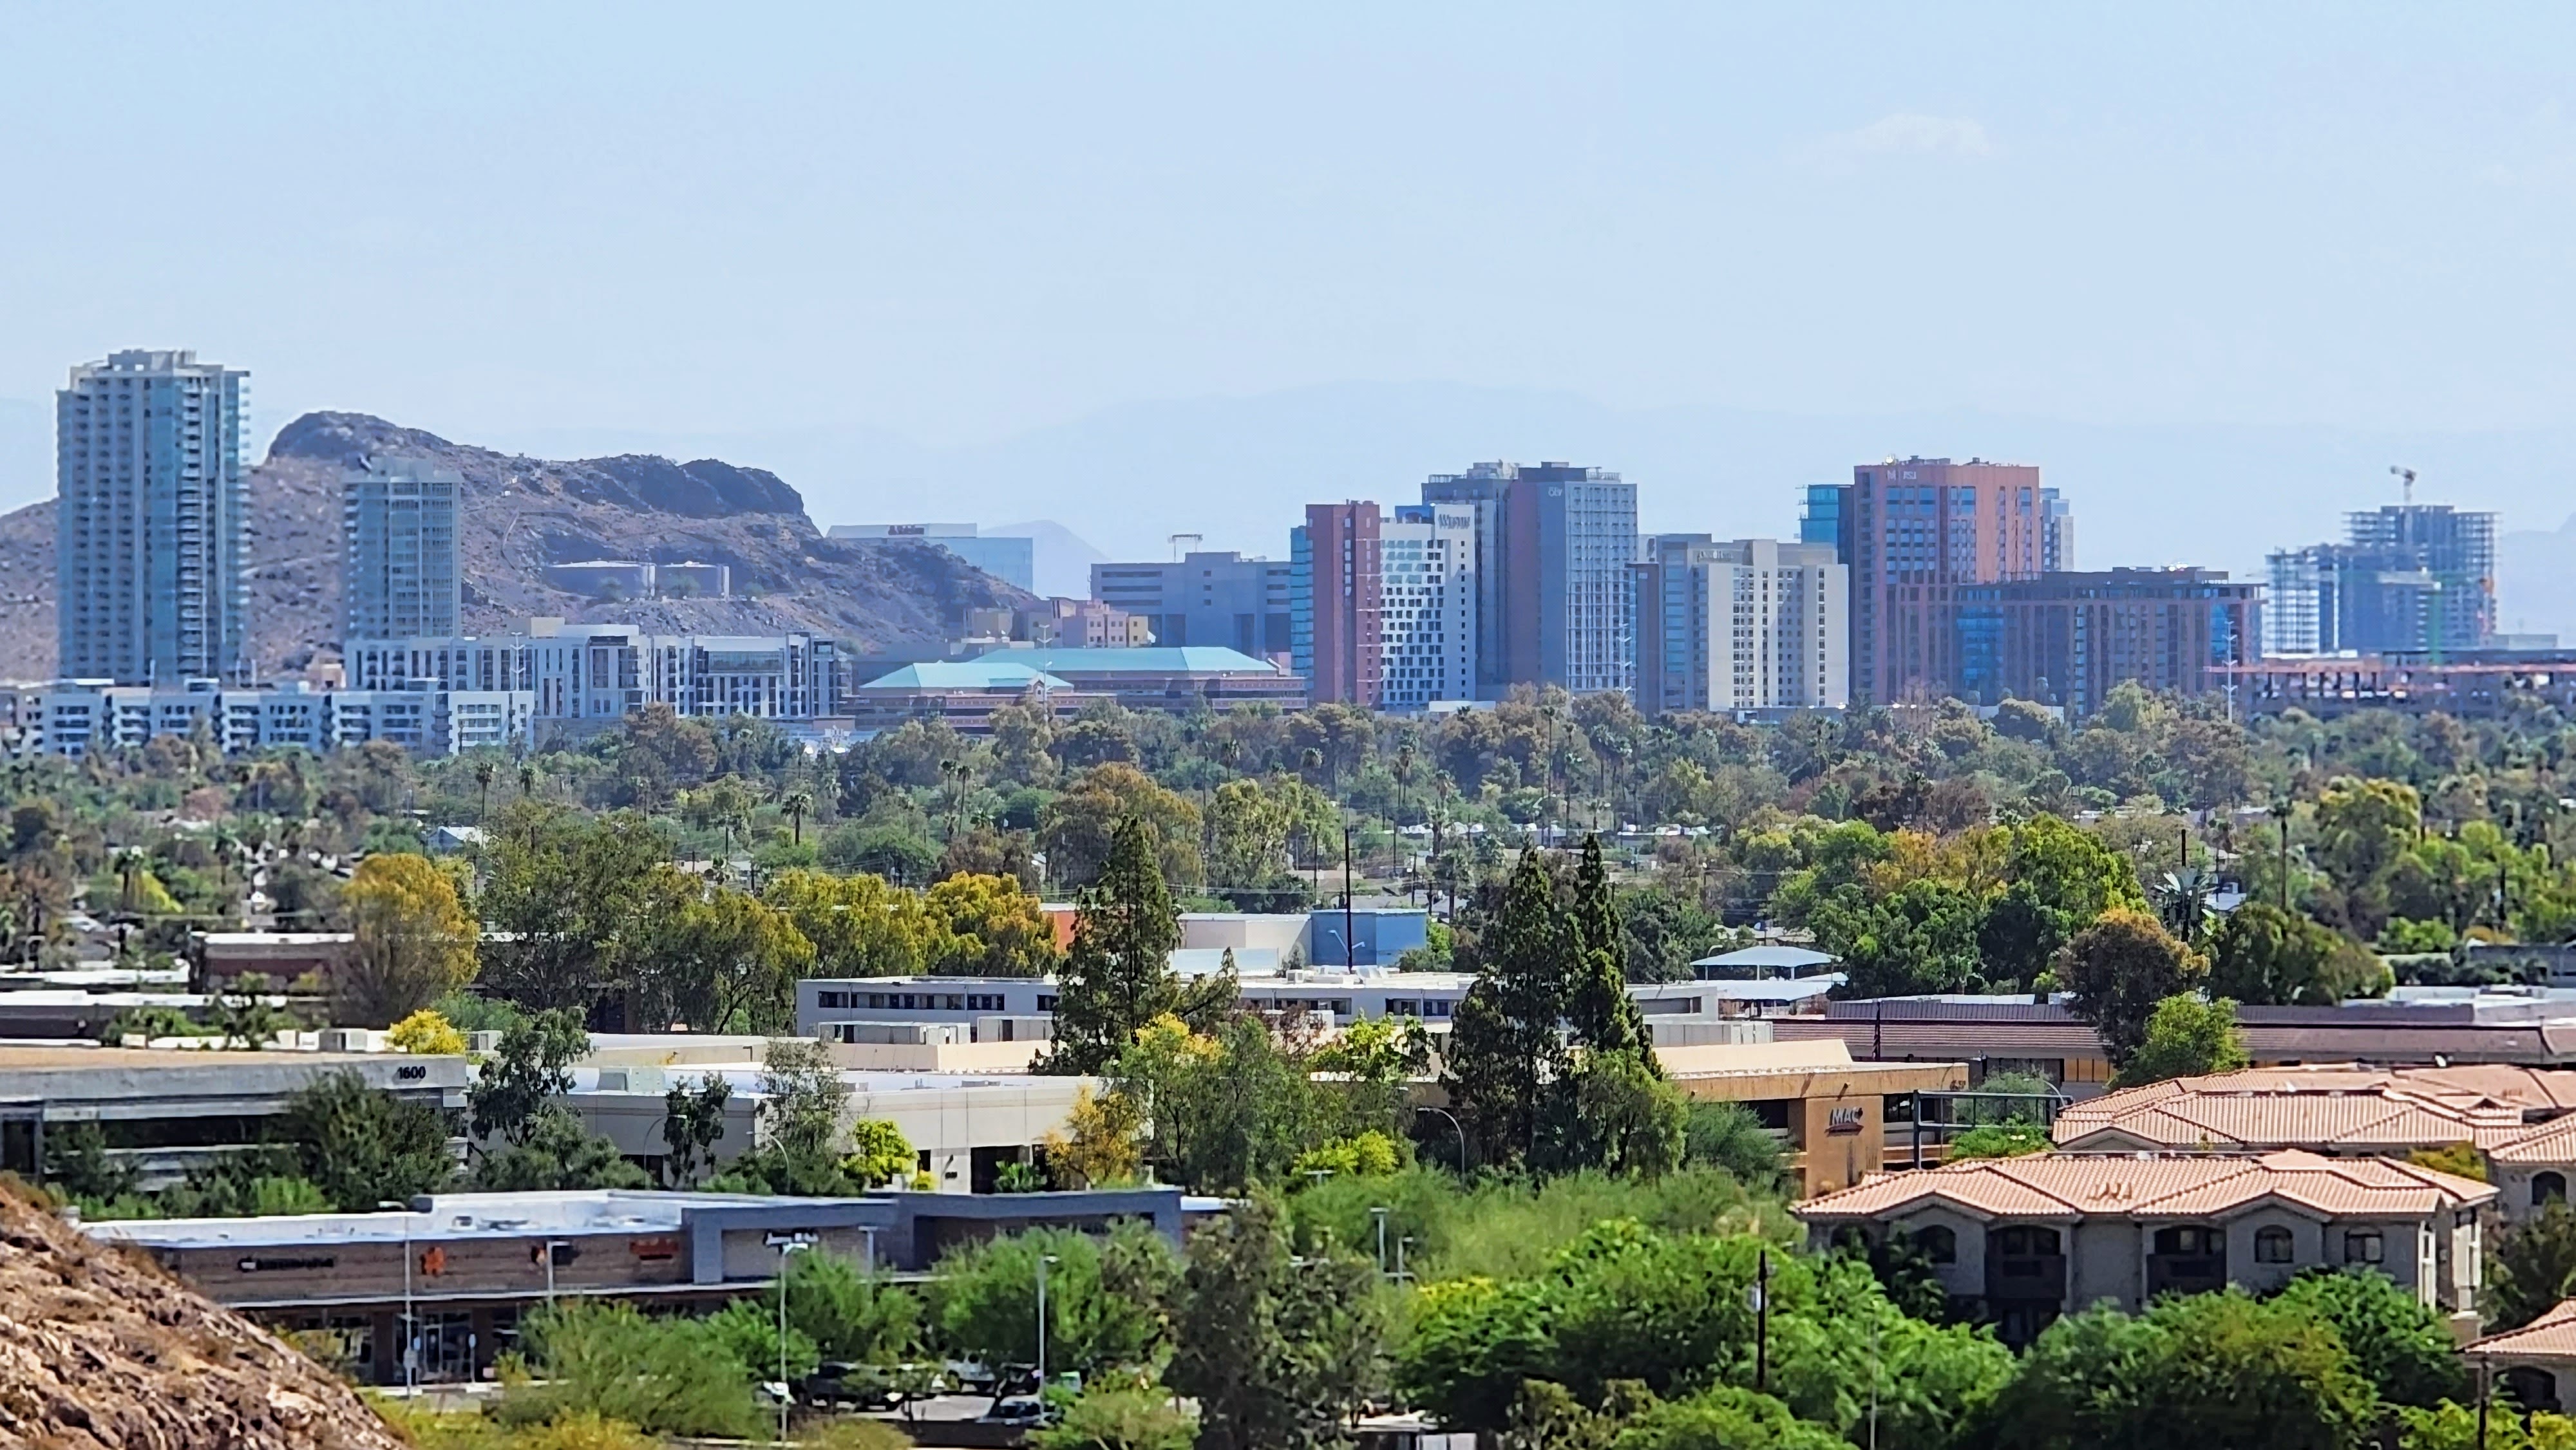 10 Exciting Things to Do in Tempe